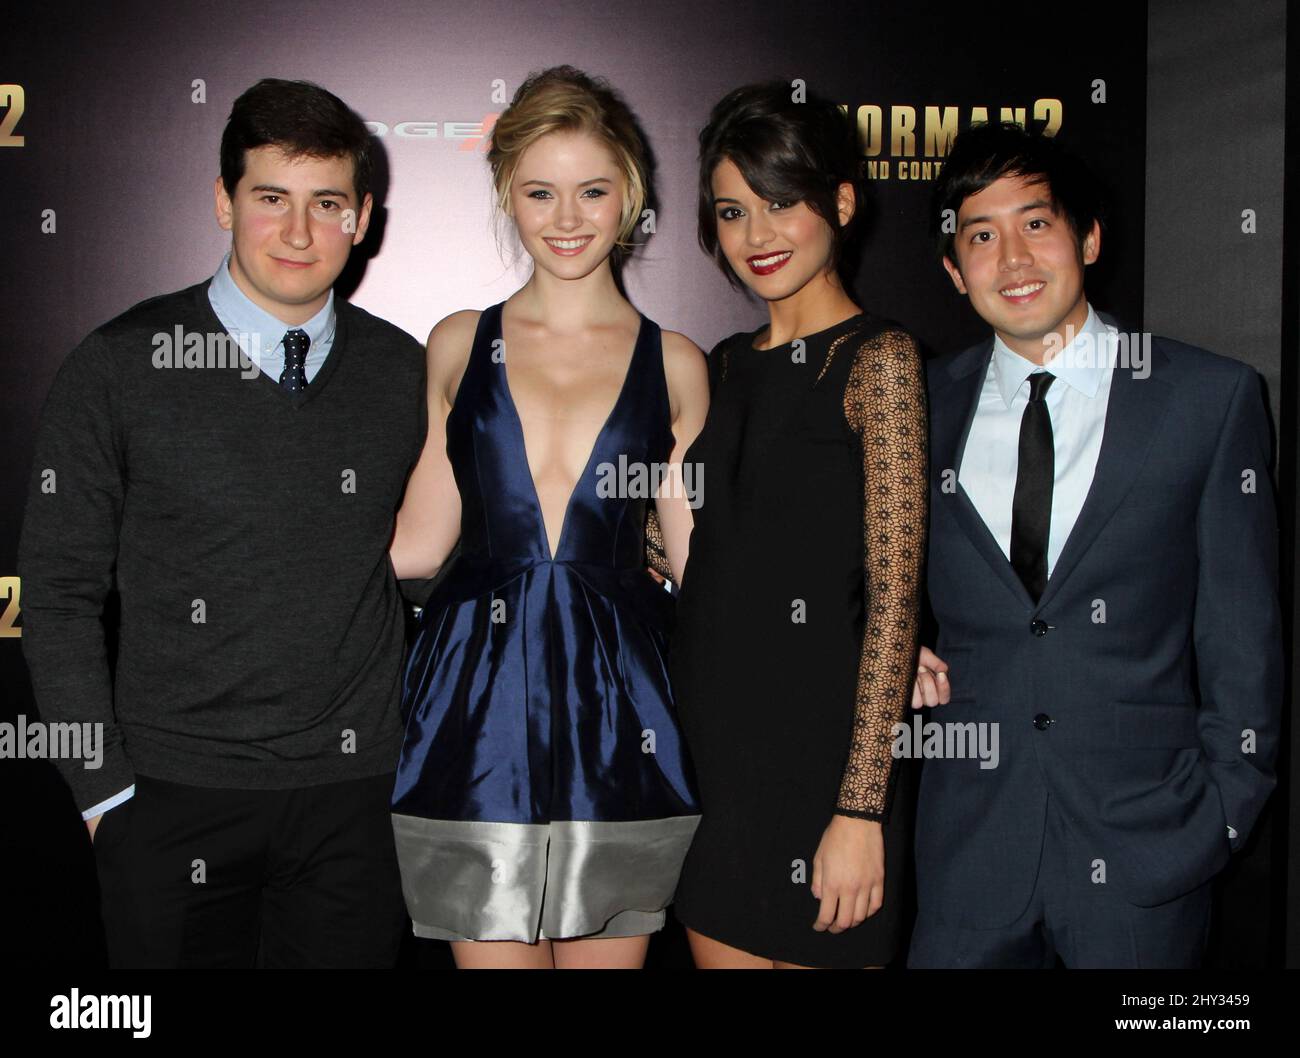 Alan Evangelista, Sam Lerner, Ginny Gardner and Sofia Black-D'El attending the premiere of Anchorman 2: The Legend Continues, in New York. Stock Photo